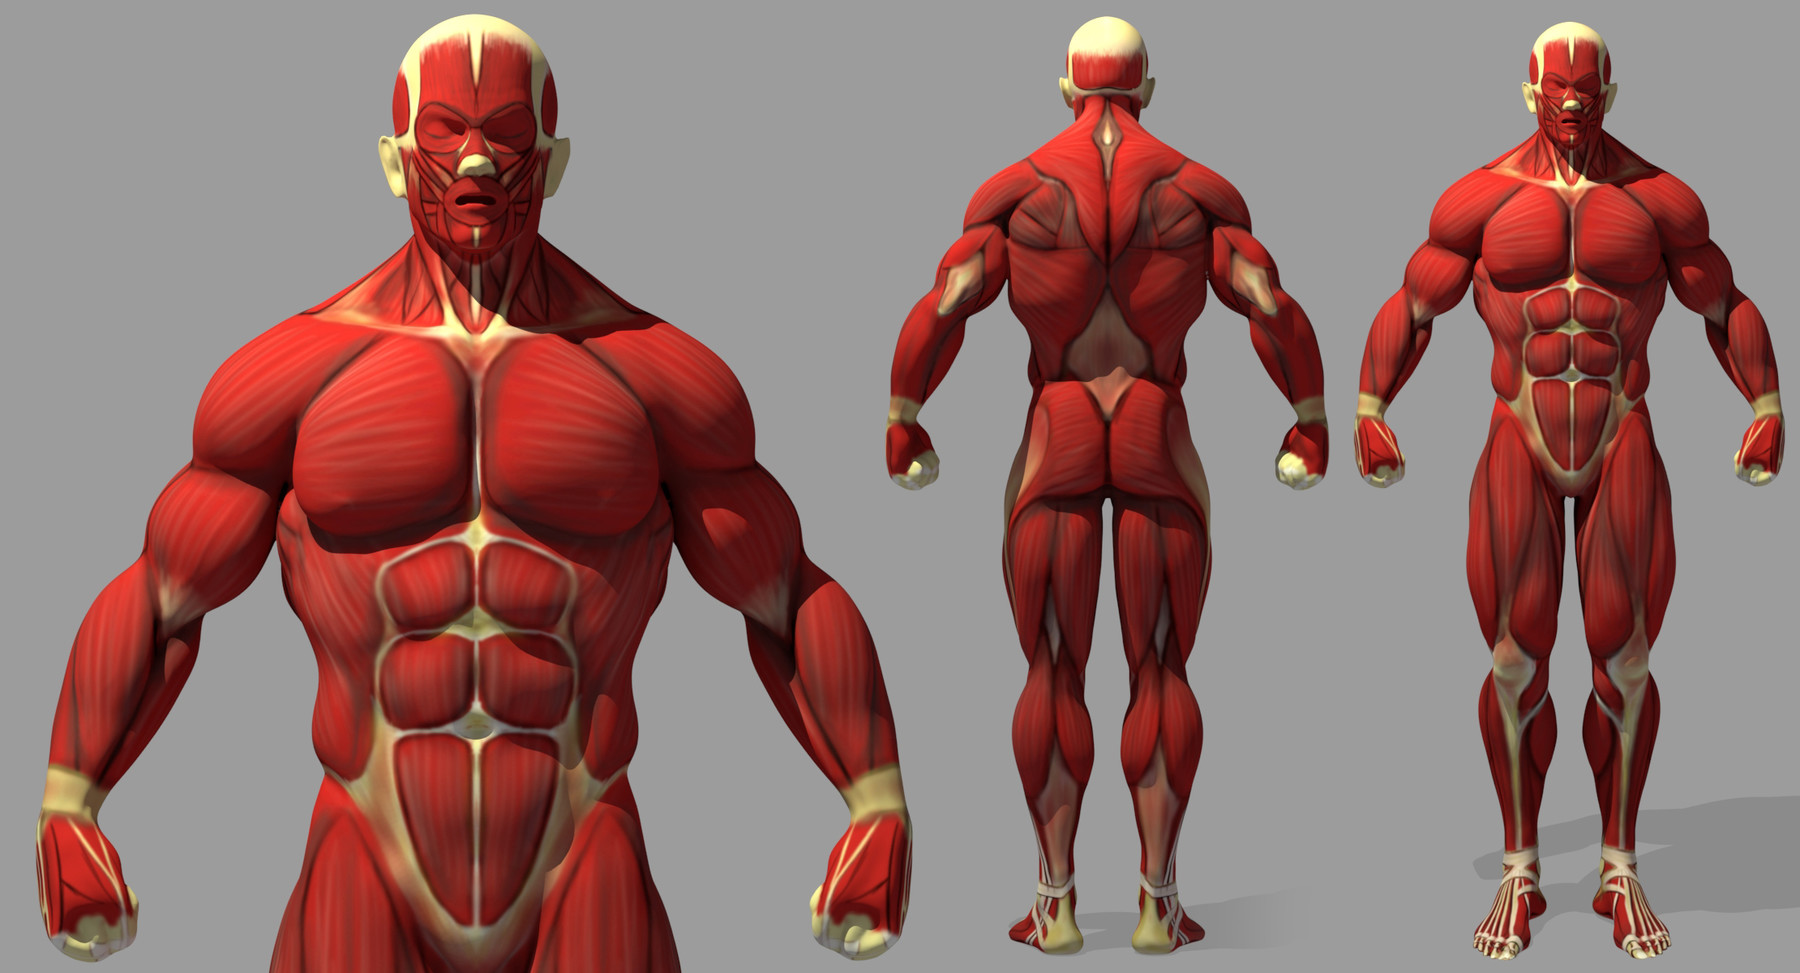 ArtStation Muscle Reference Resources